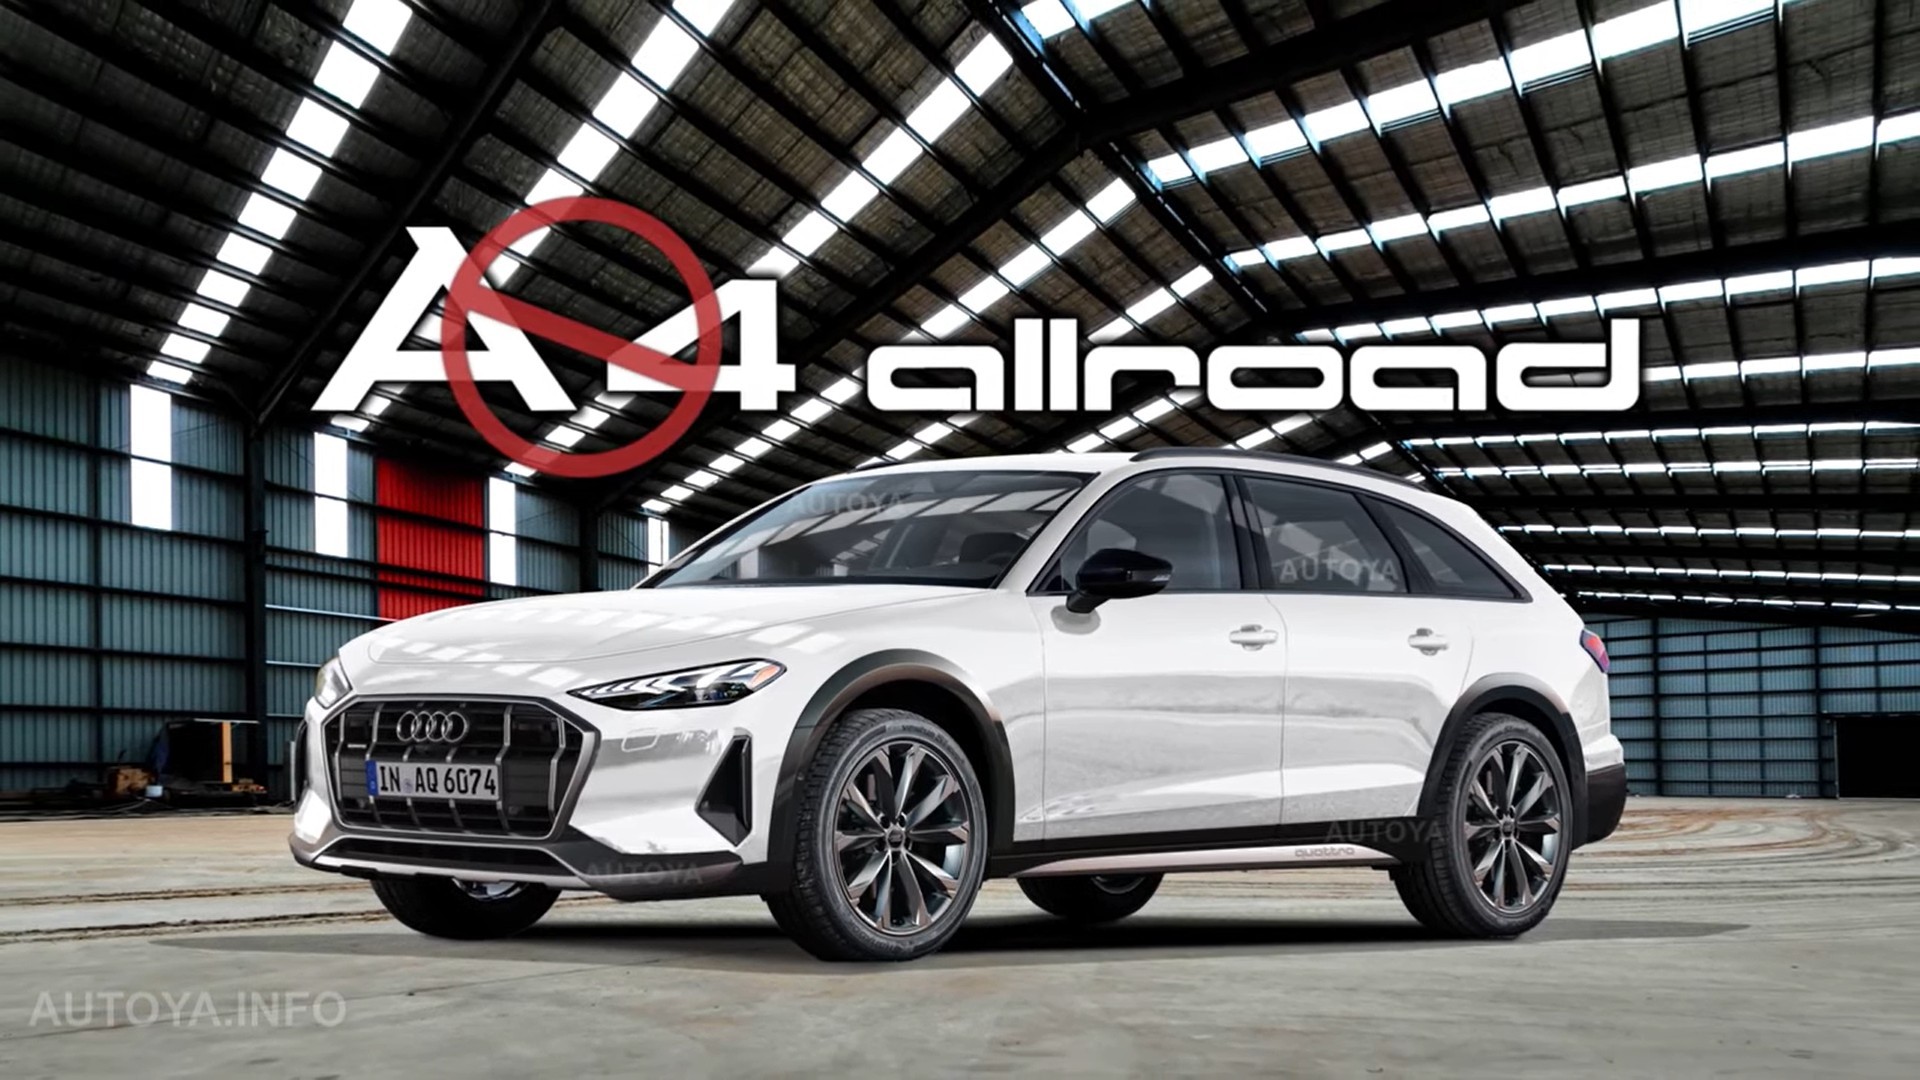 NextGen 2025 Audi A4 or A5 Allroad (B10) Shows Everything, Albeit Only